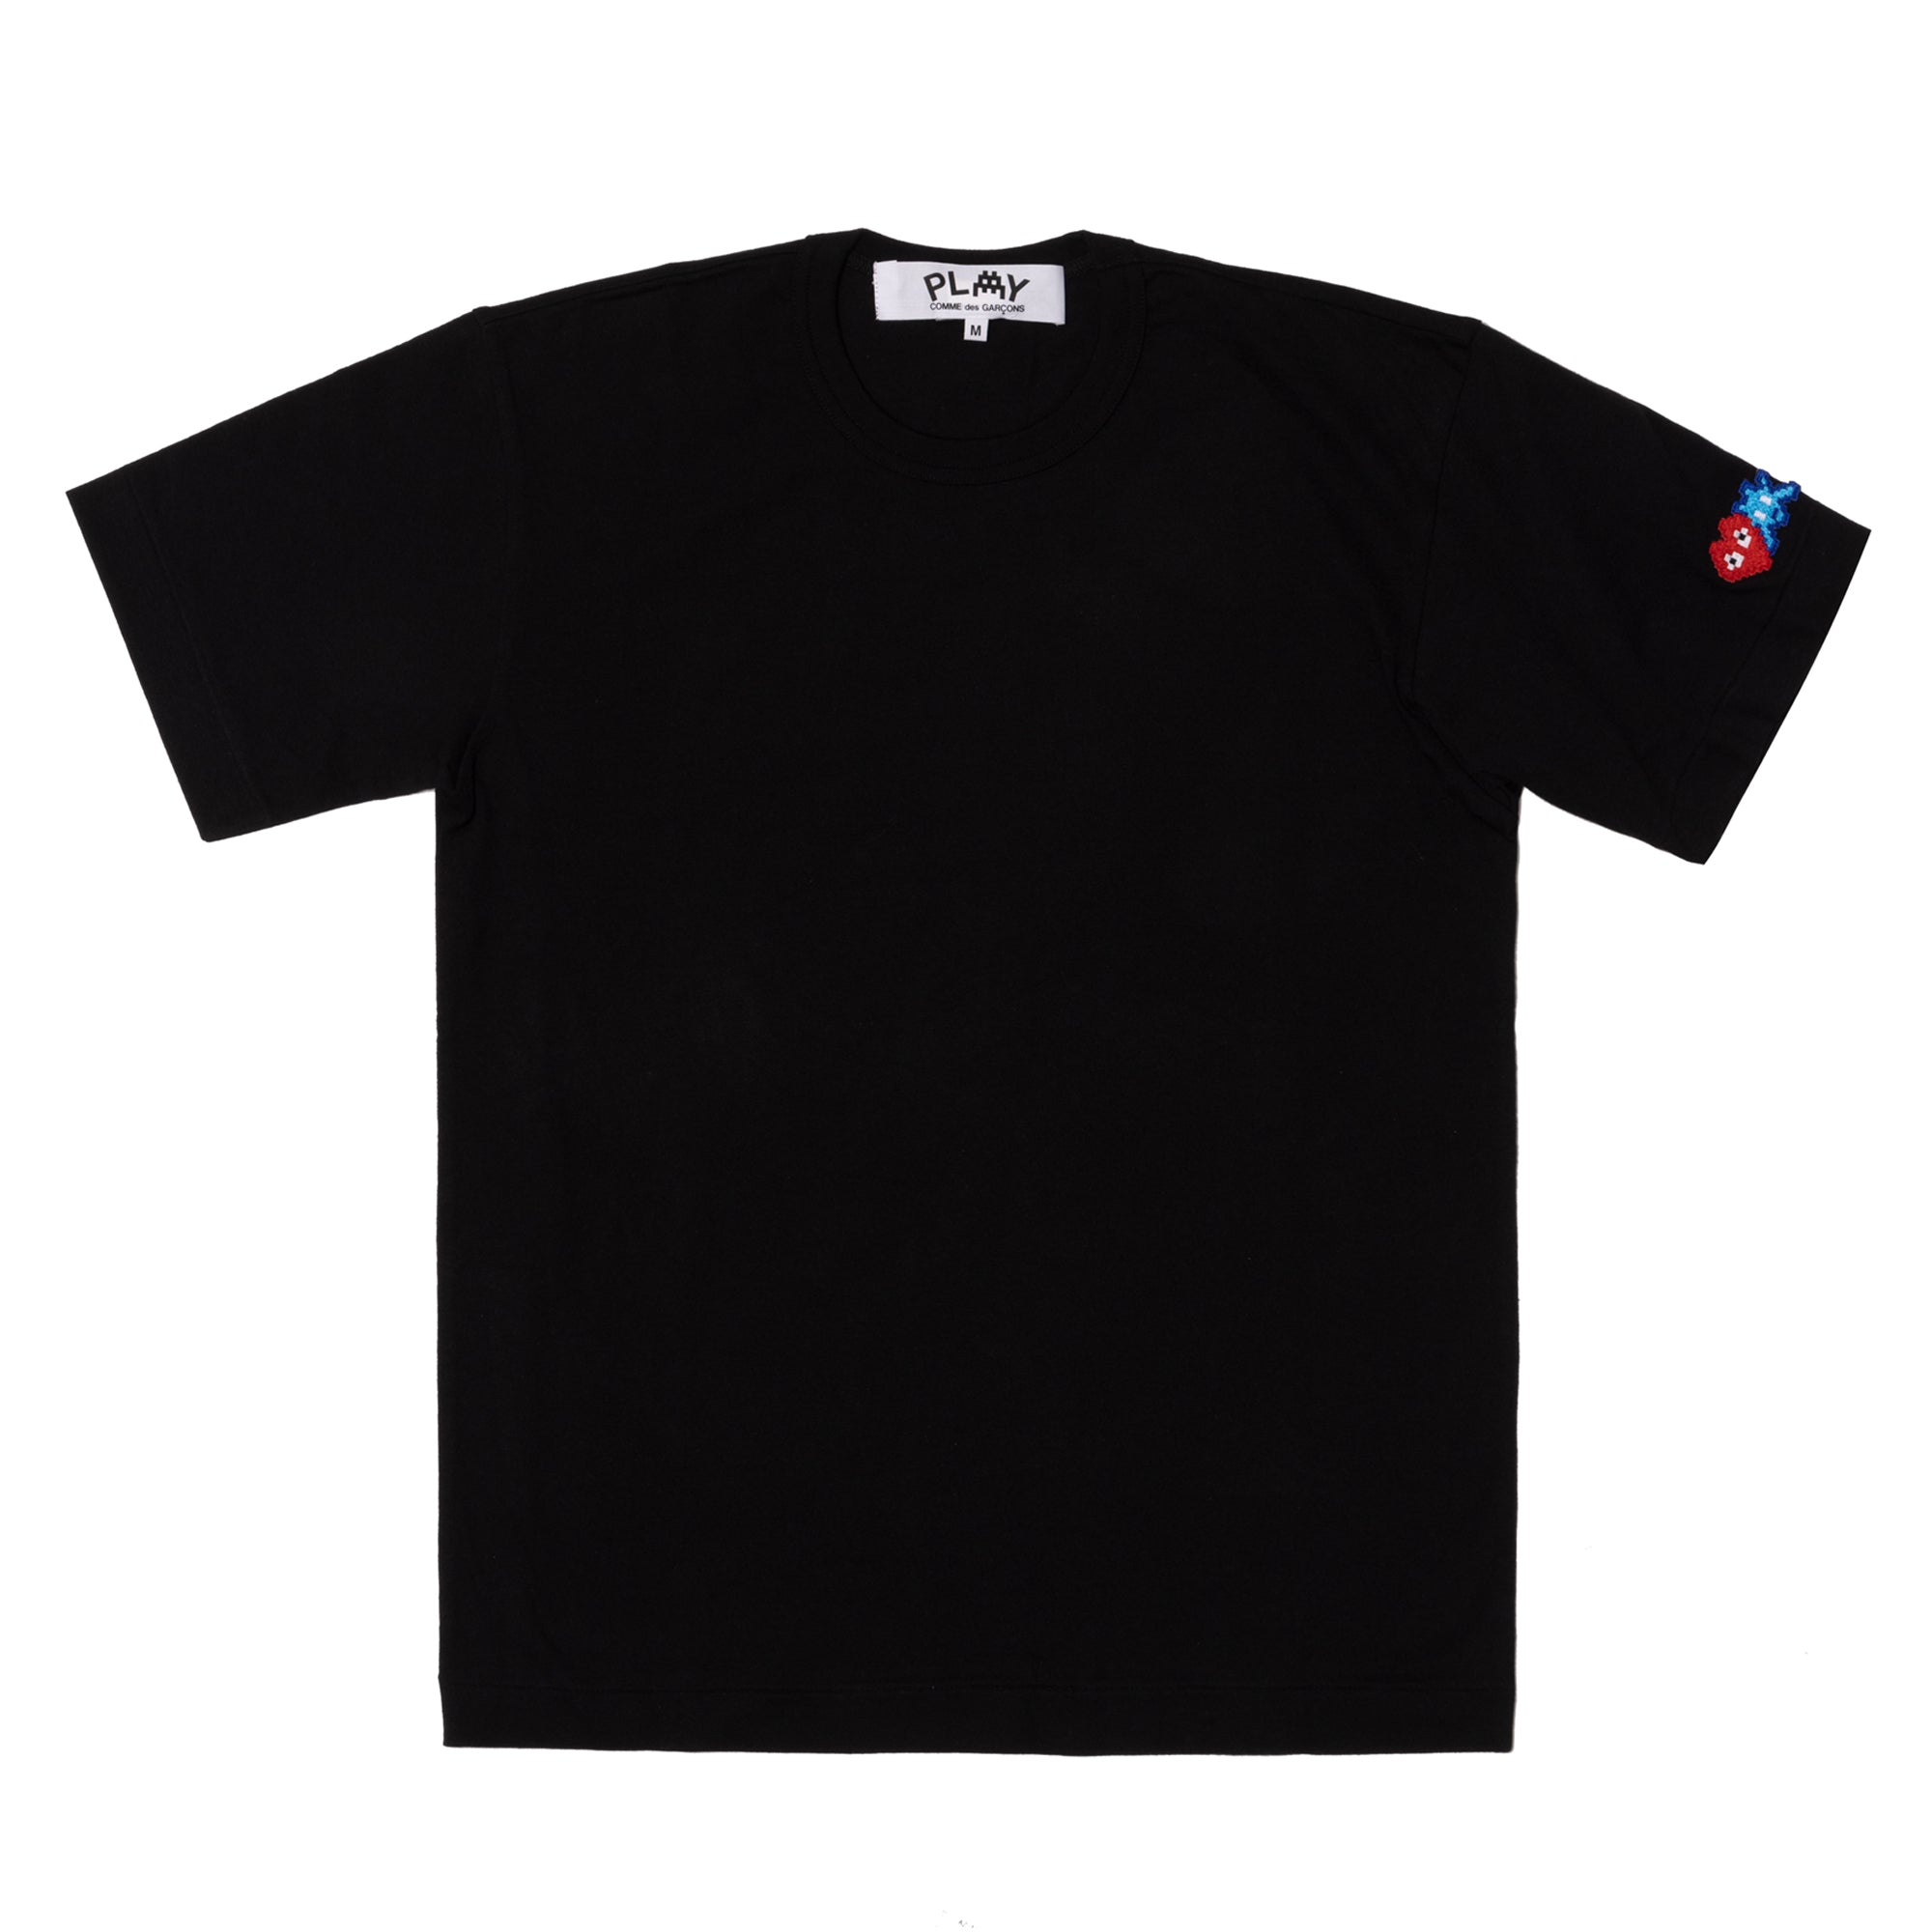 PLAY CDG - INVADER S/S T-Shirt - (Black) view 1